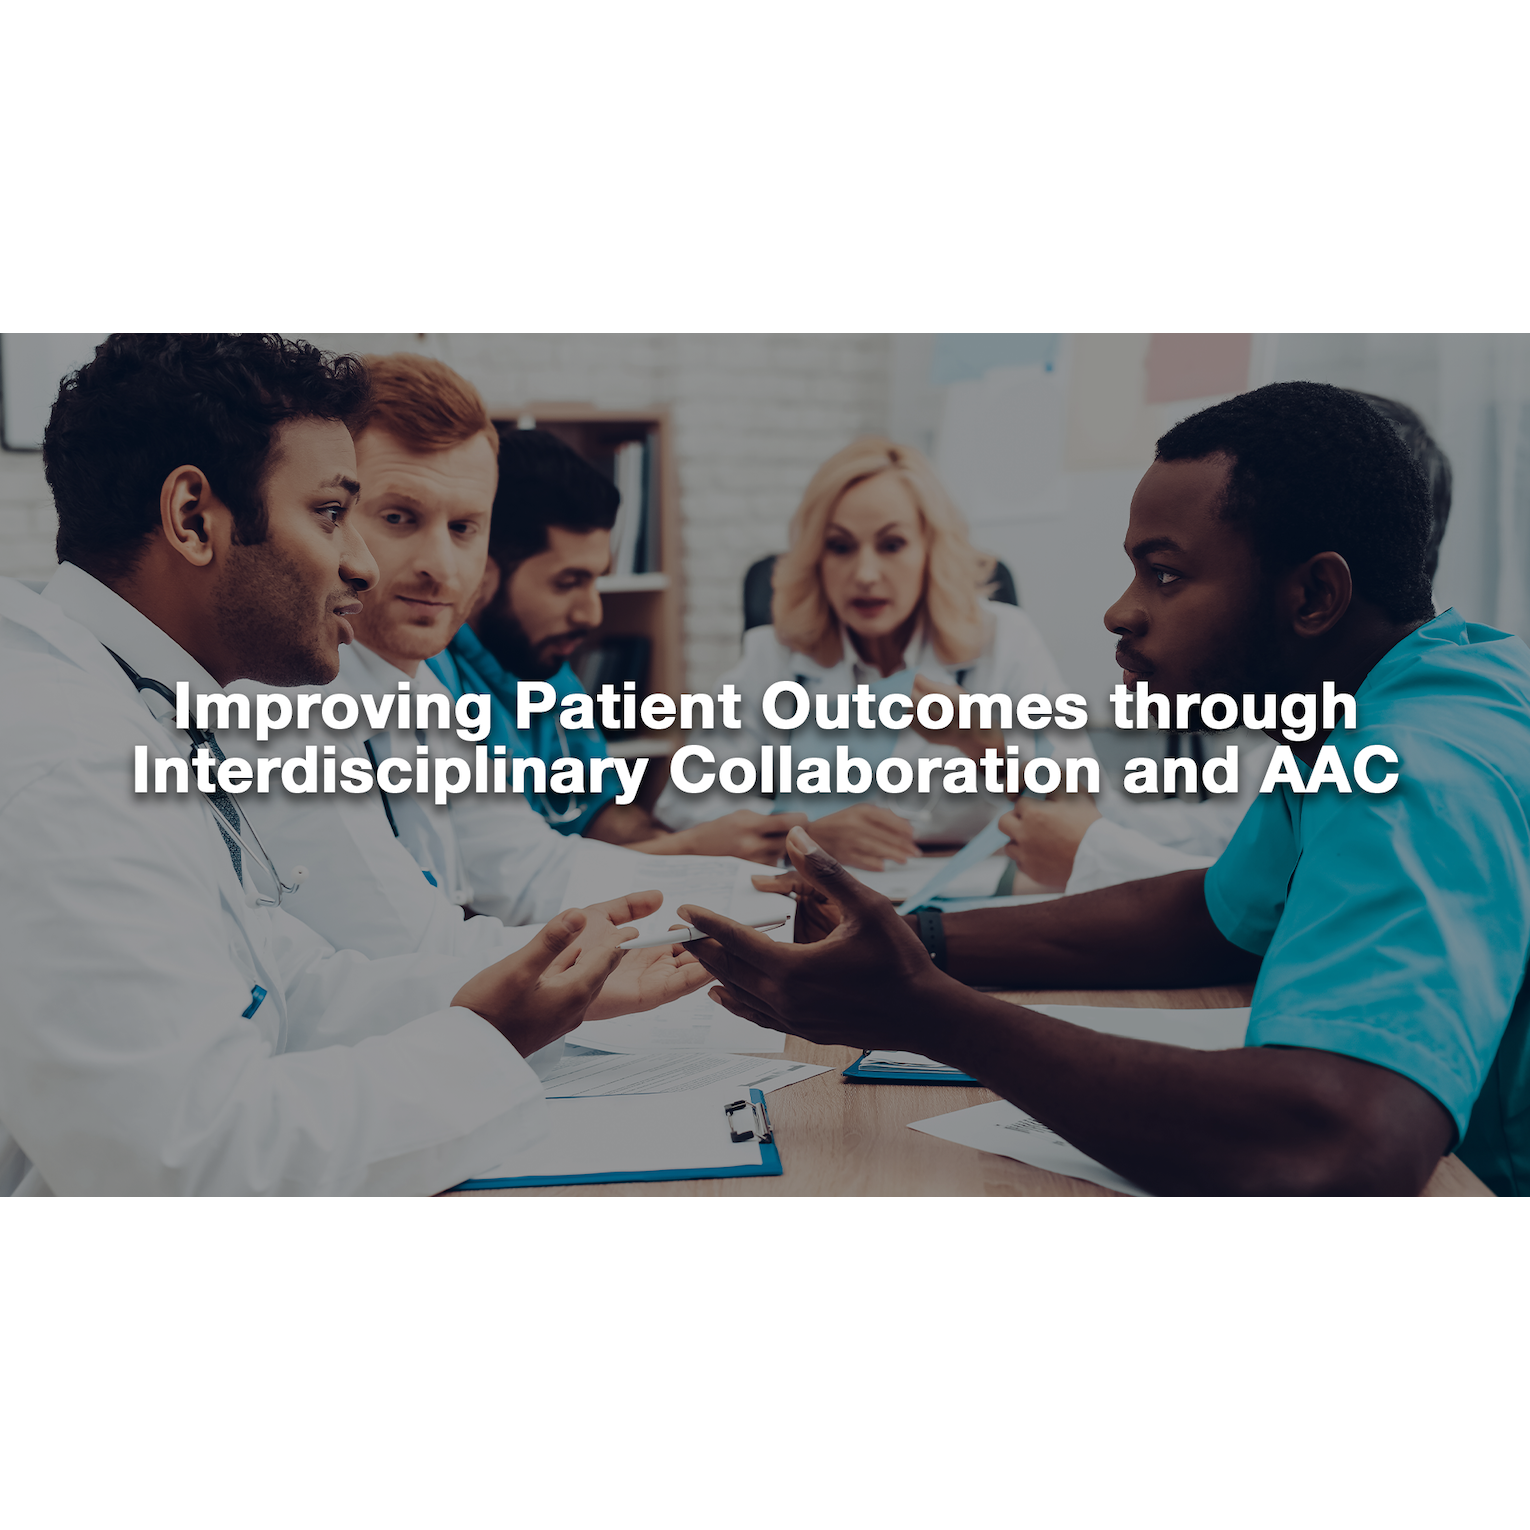 Improving Patient Outcomes through Interdisciplinary Collaboration and AAC